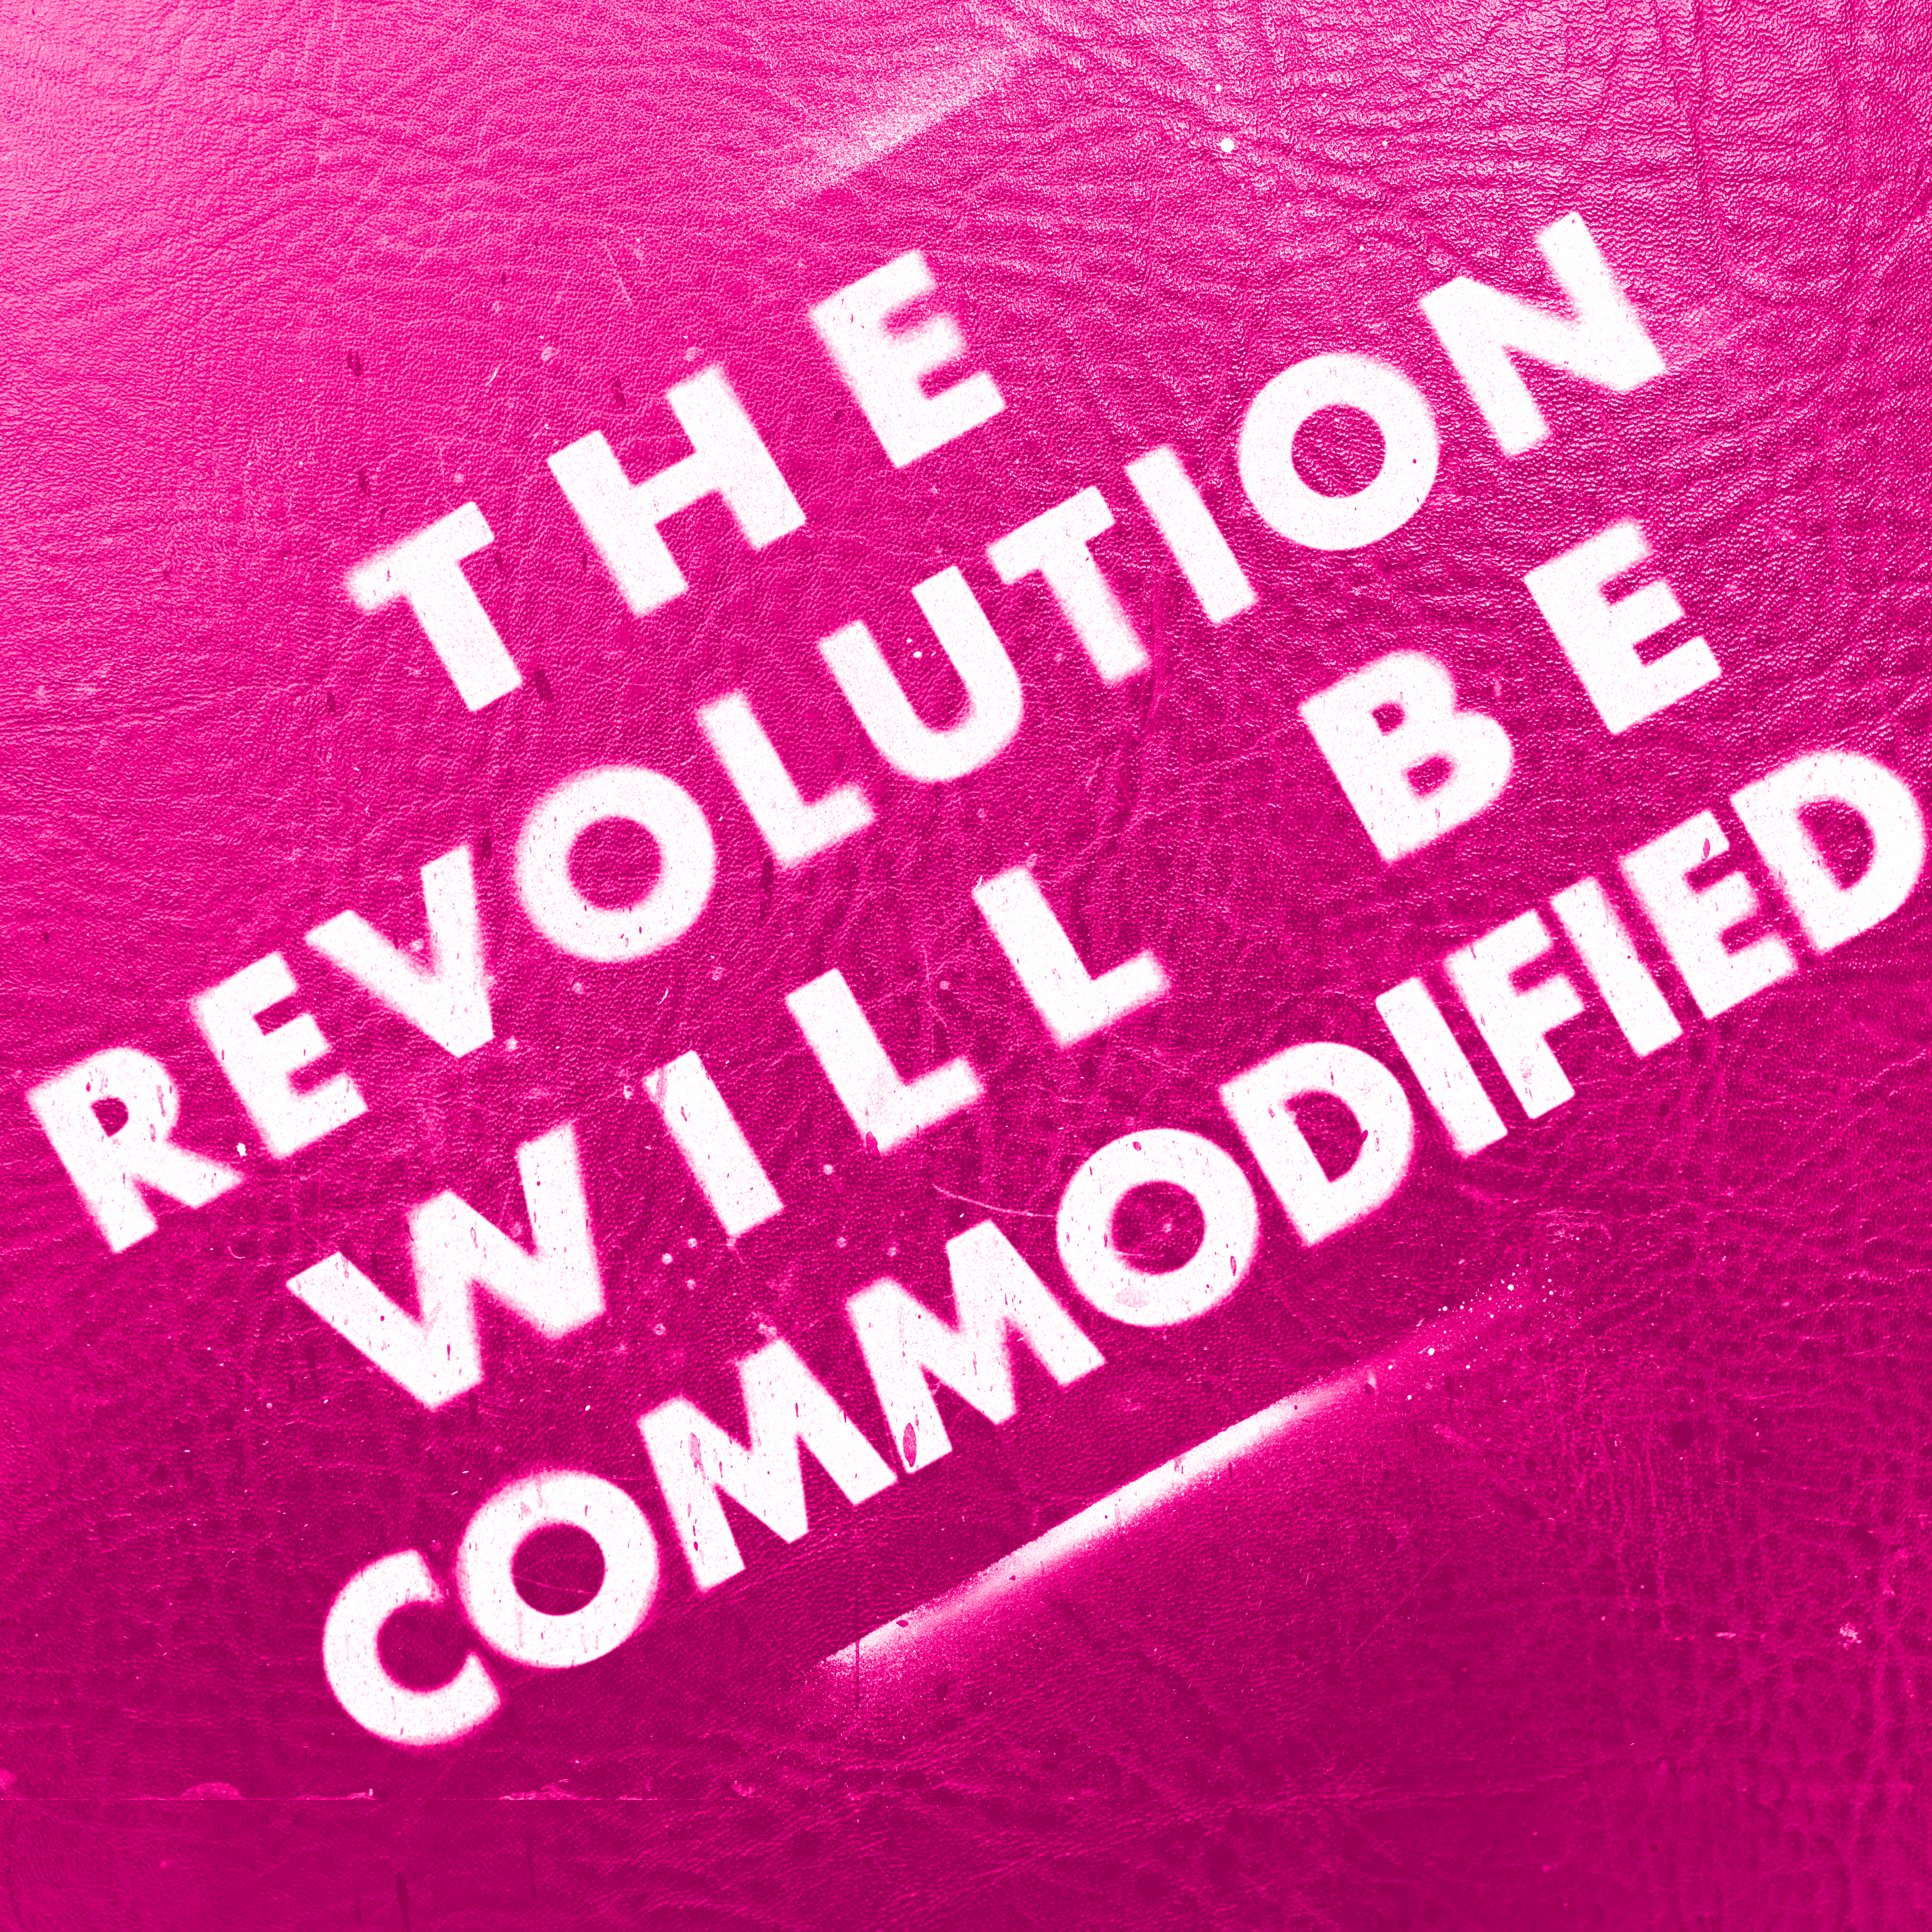 THE REVOLUTION WILL BE COMMODIFIED